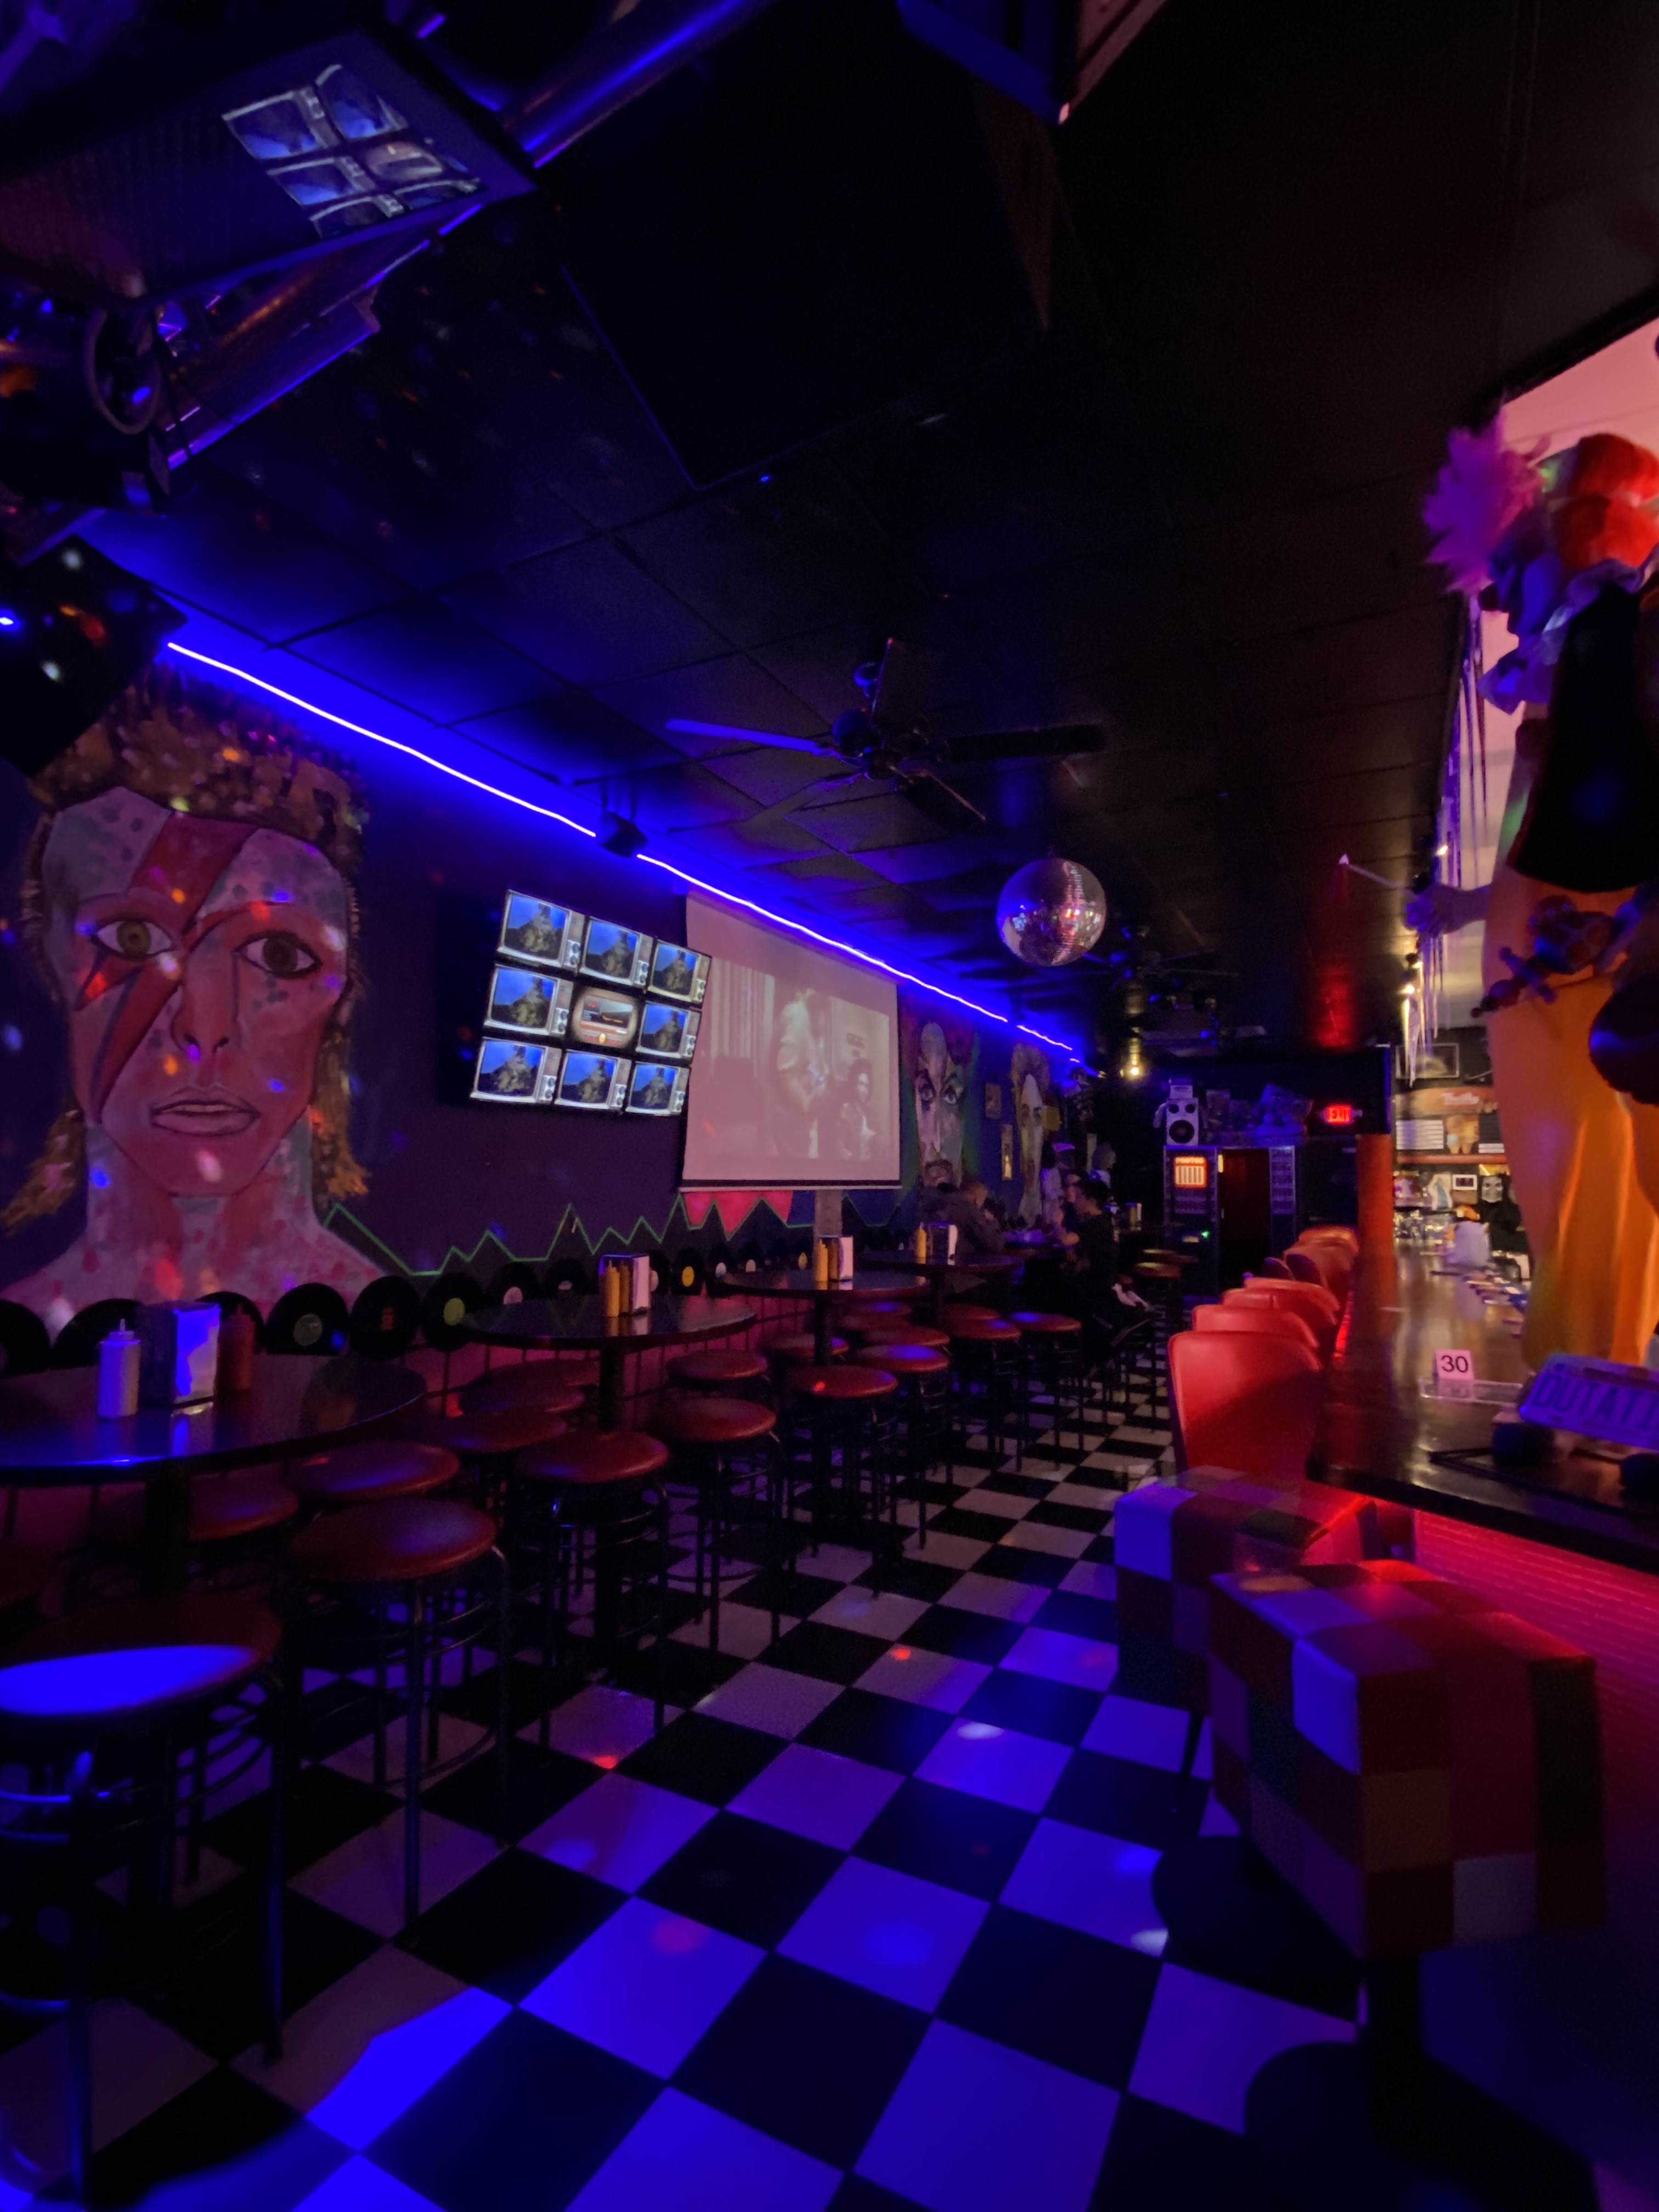 Back to the 80s Cafe and More bar - blacklight, mural of David Bowie, black and white checkered floors